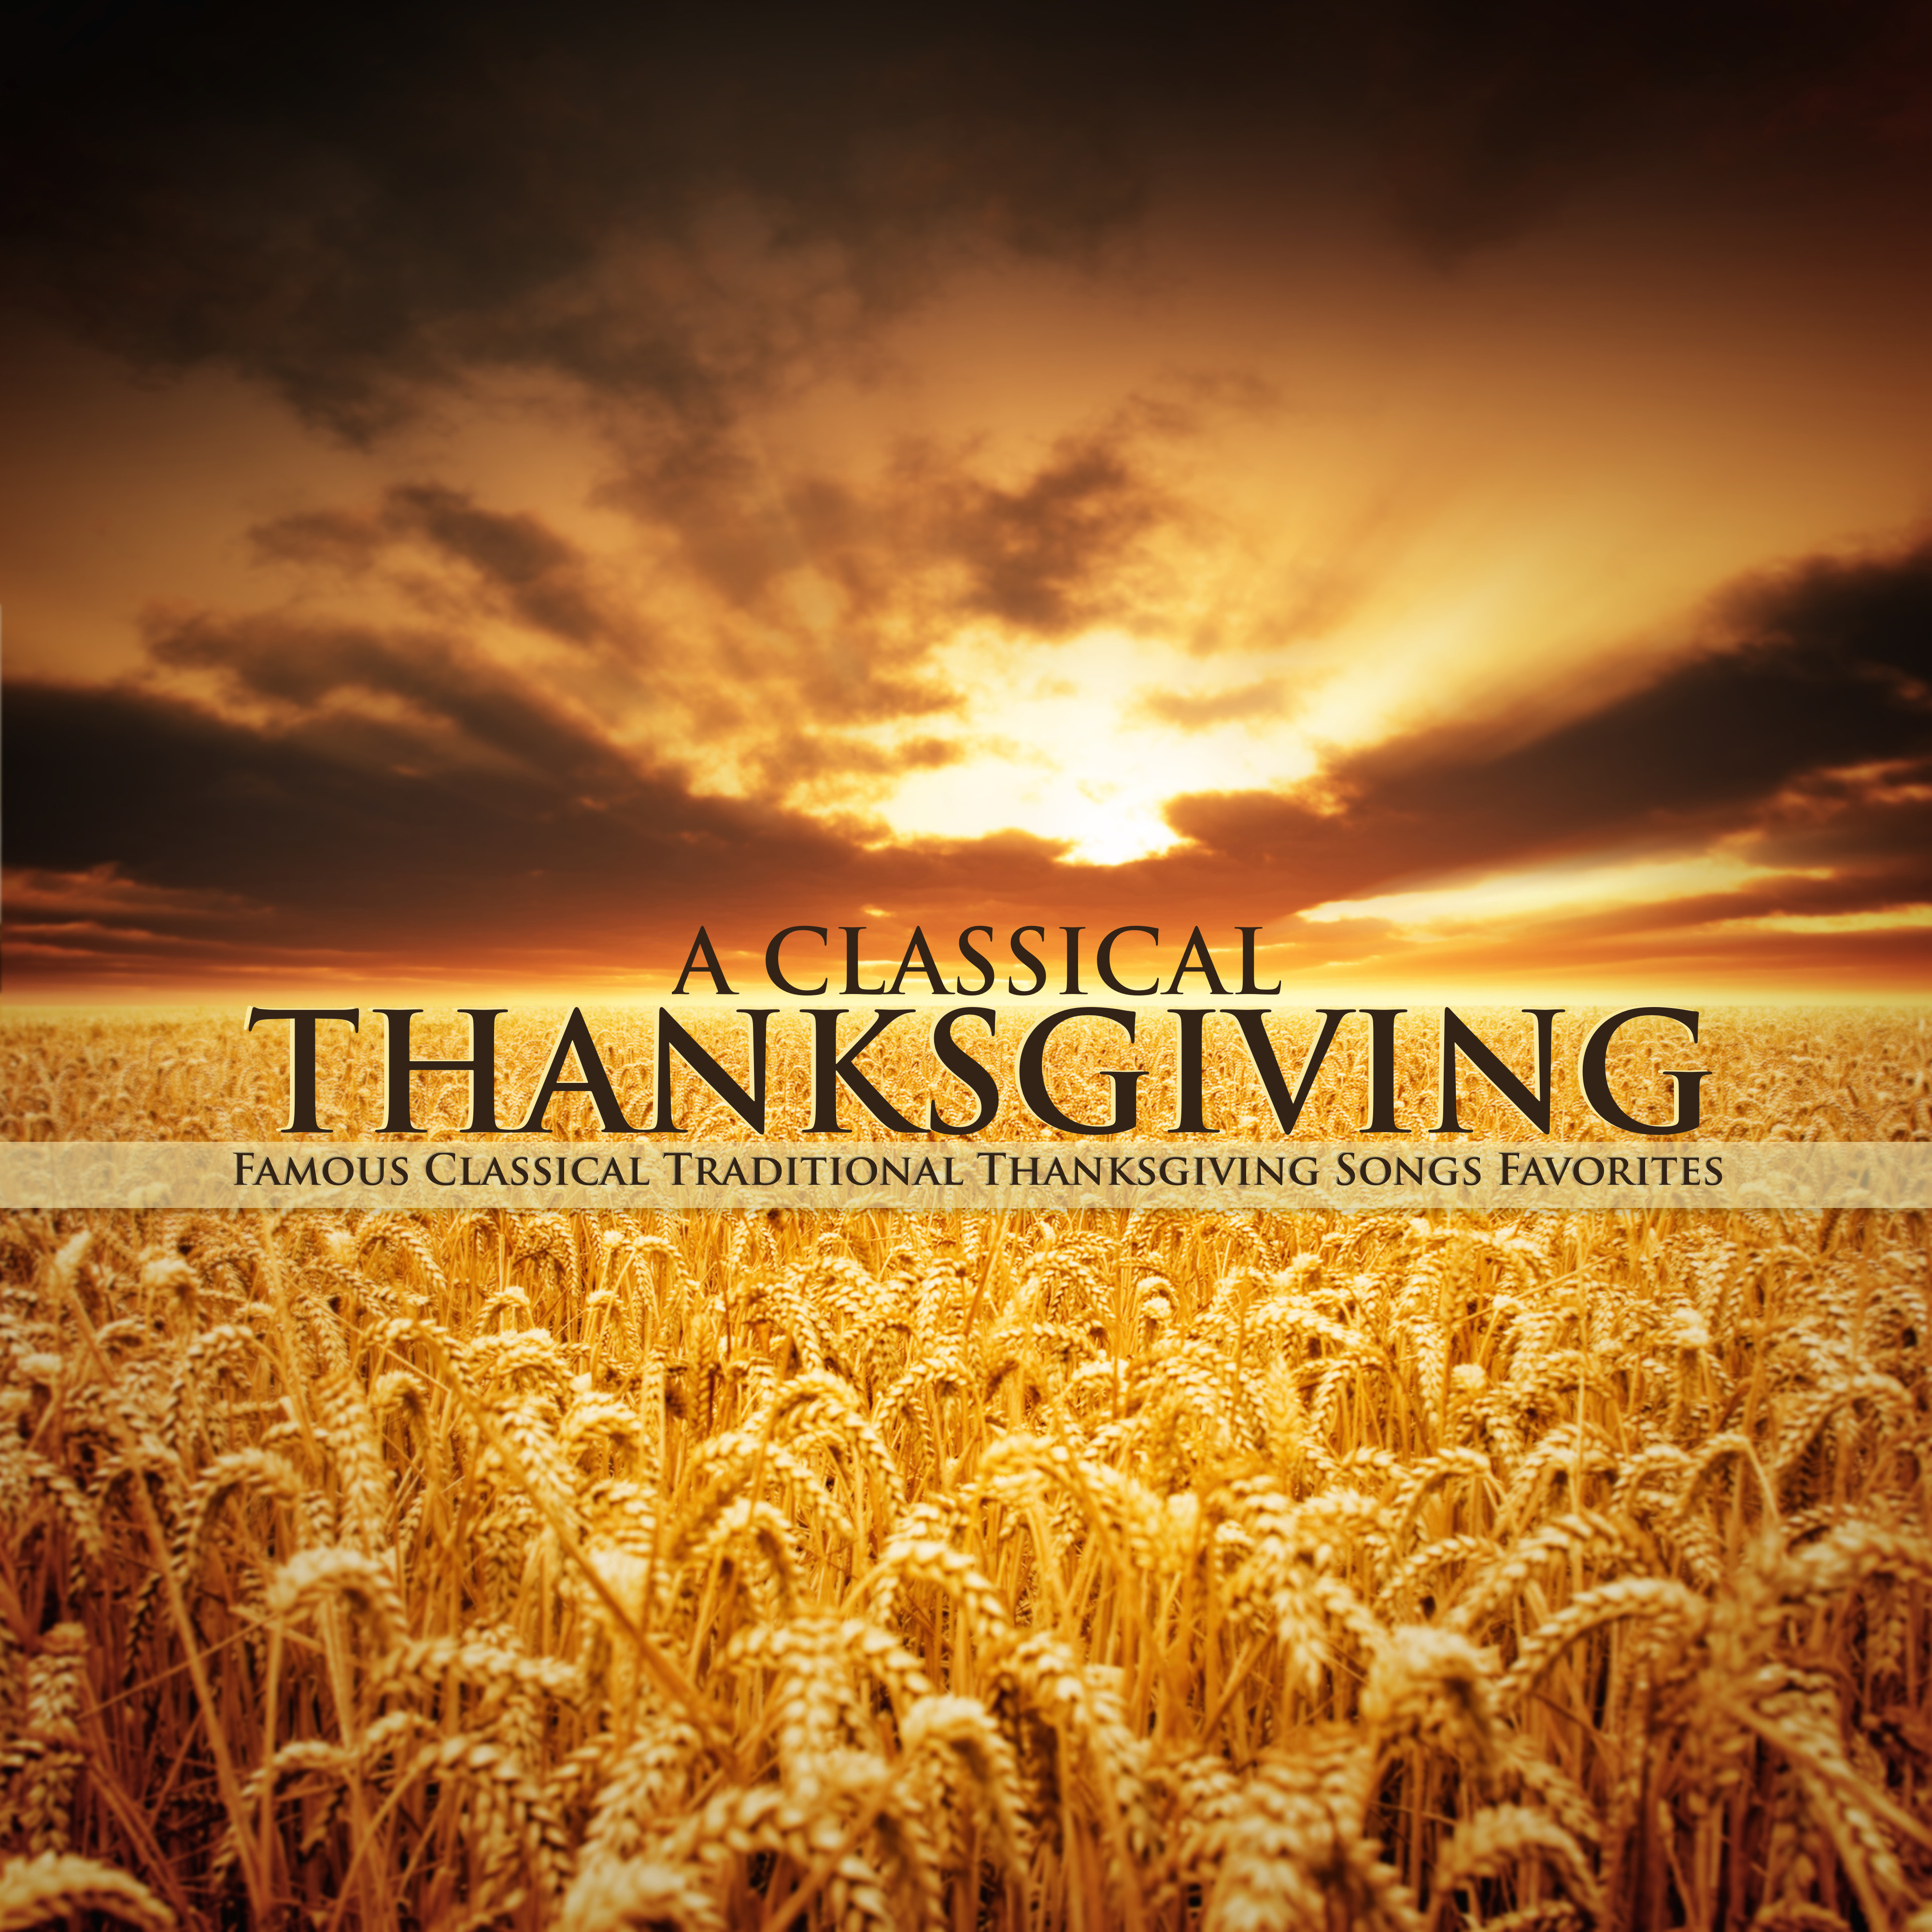 A Classical Thanksgiving - Famous Classical Traditional Thanksgiving Songs Favorites